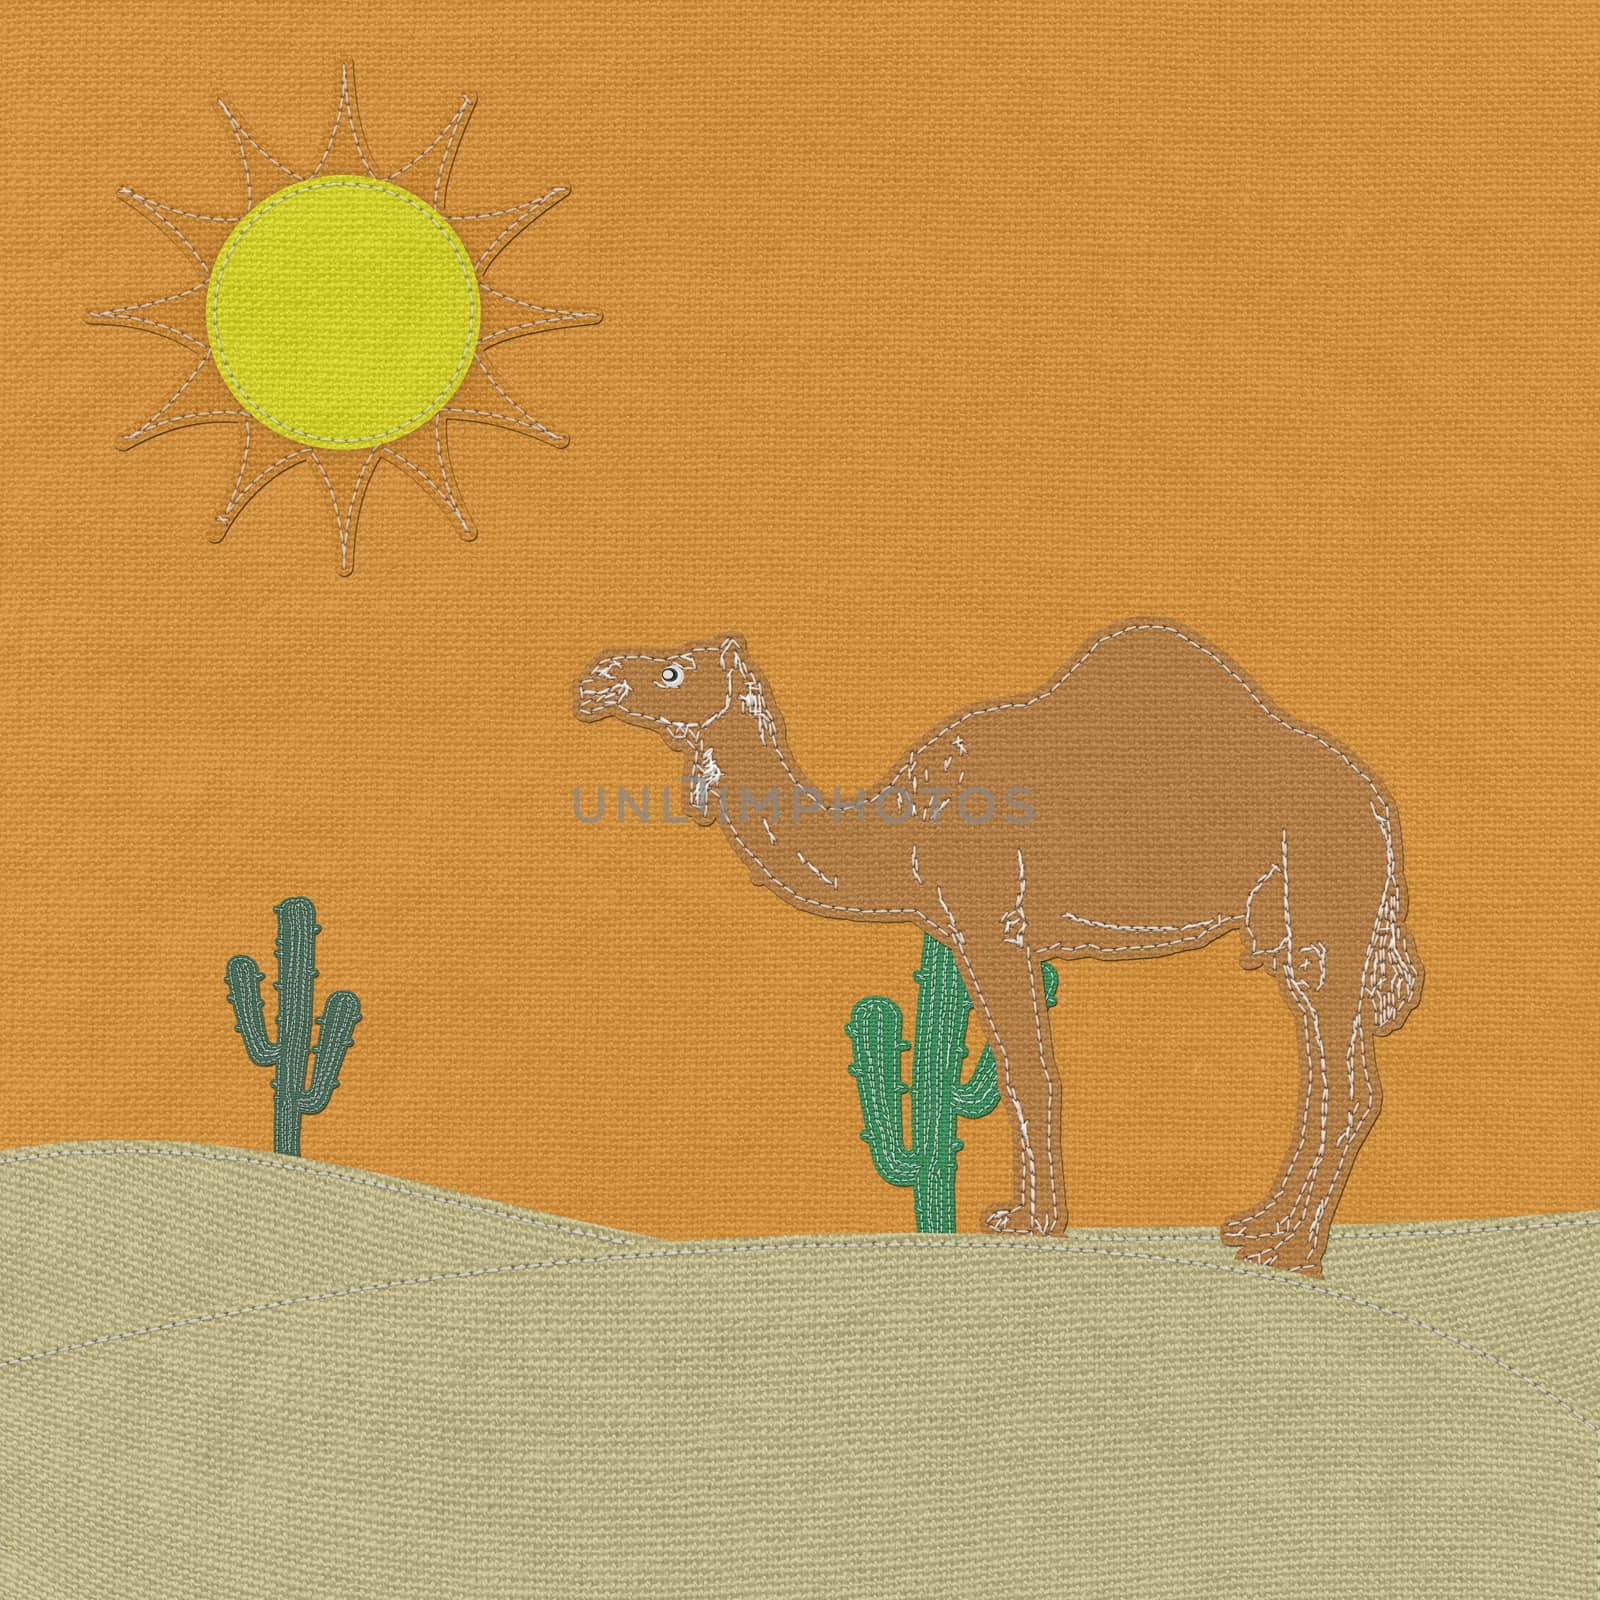 Lone Camel in the Desert sand with stitch style on fabric backgr by basketman23